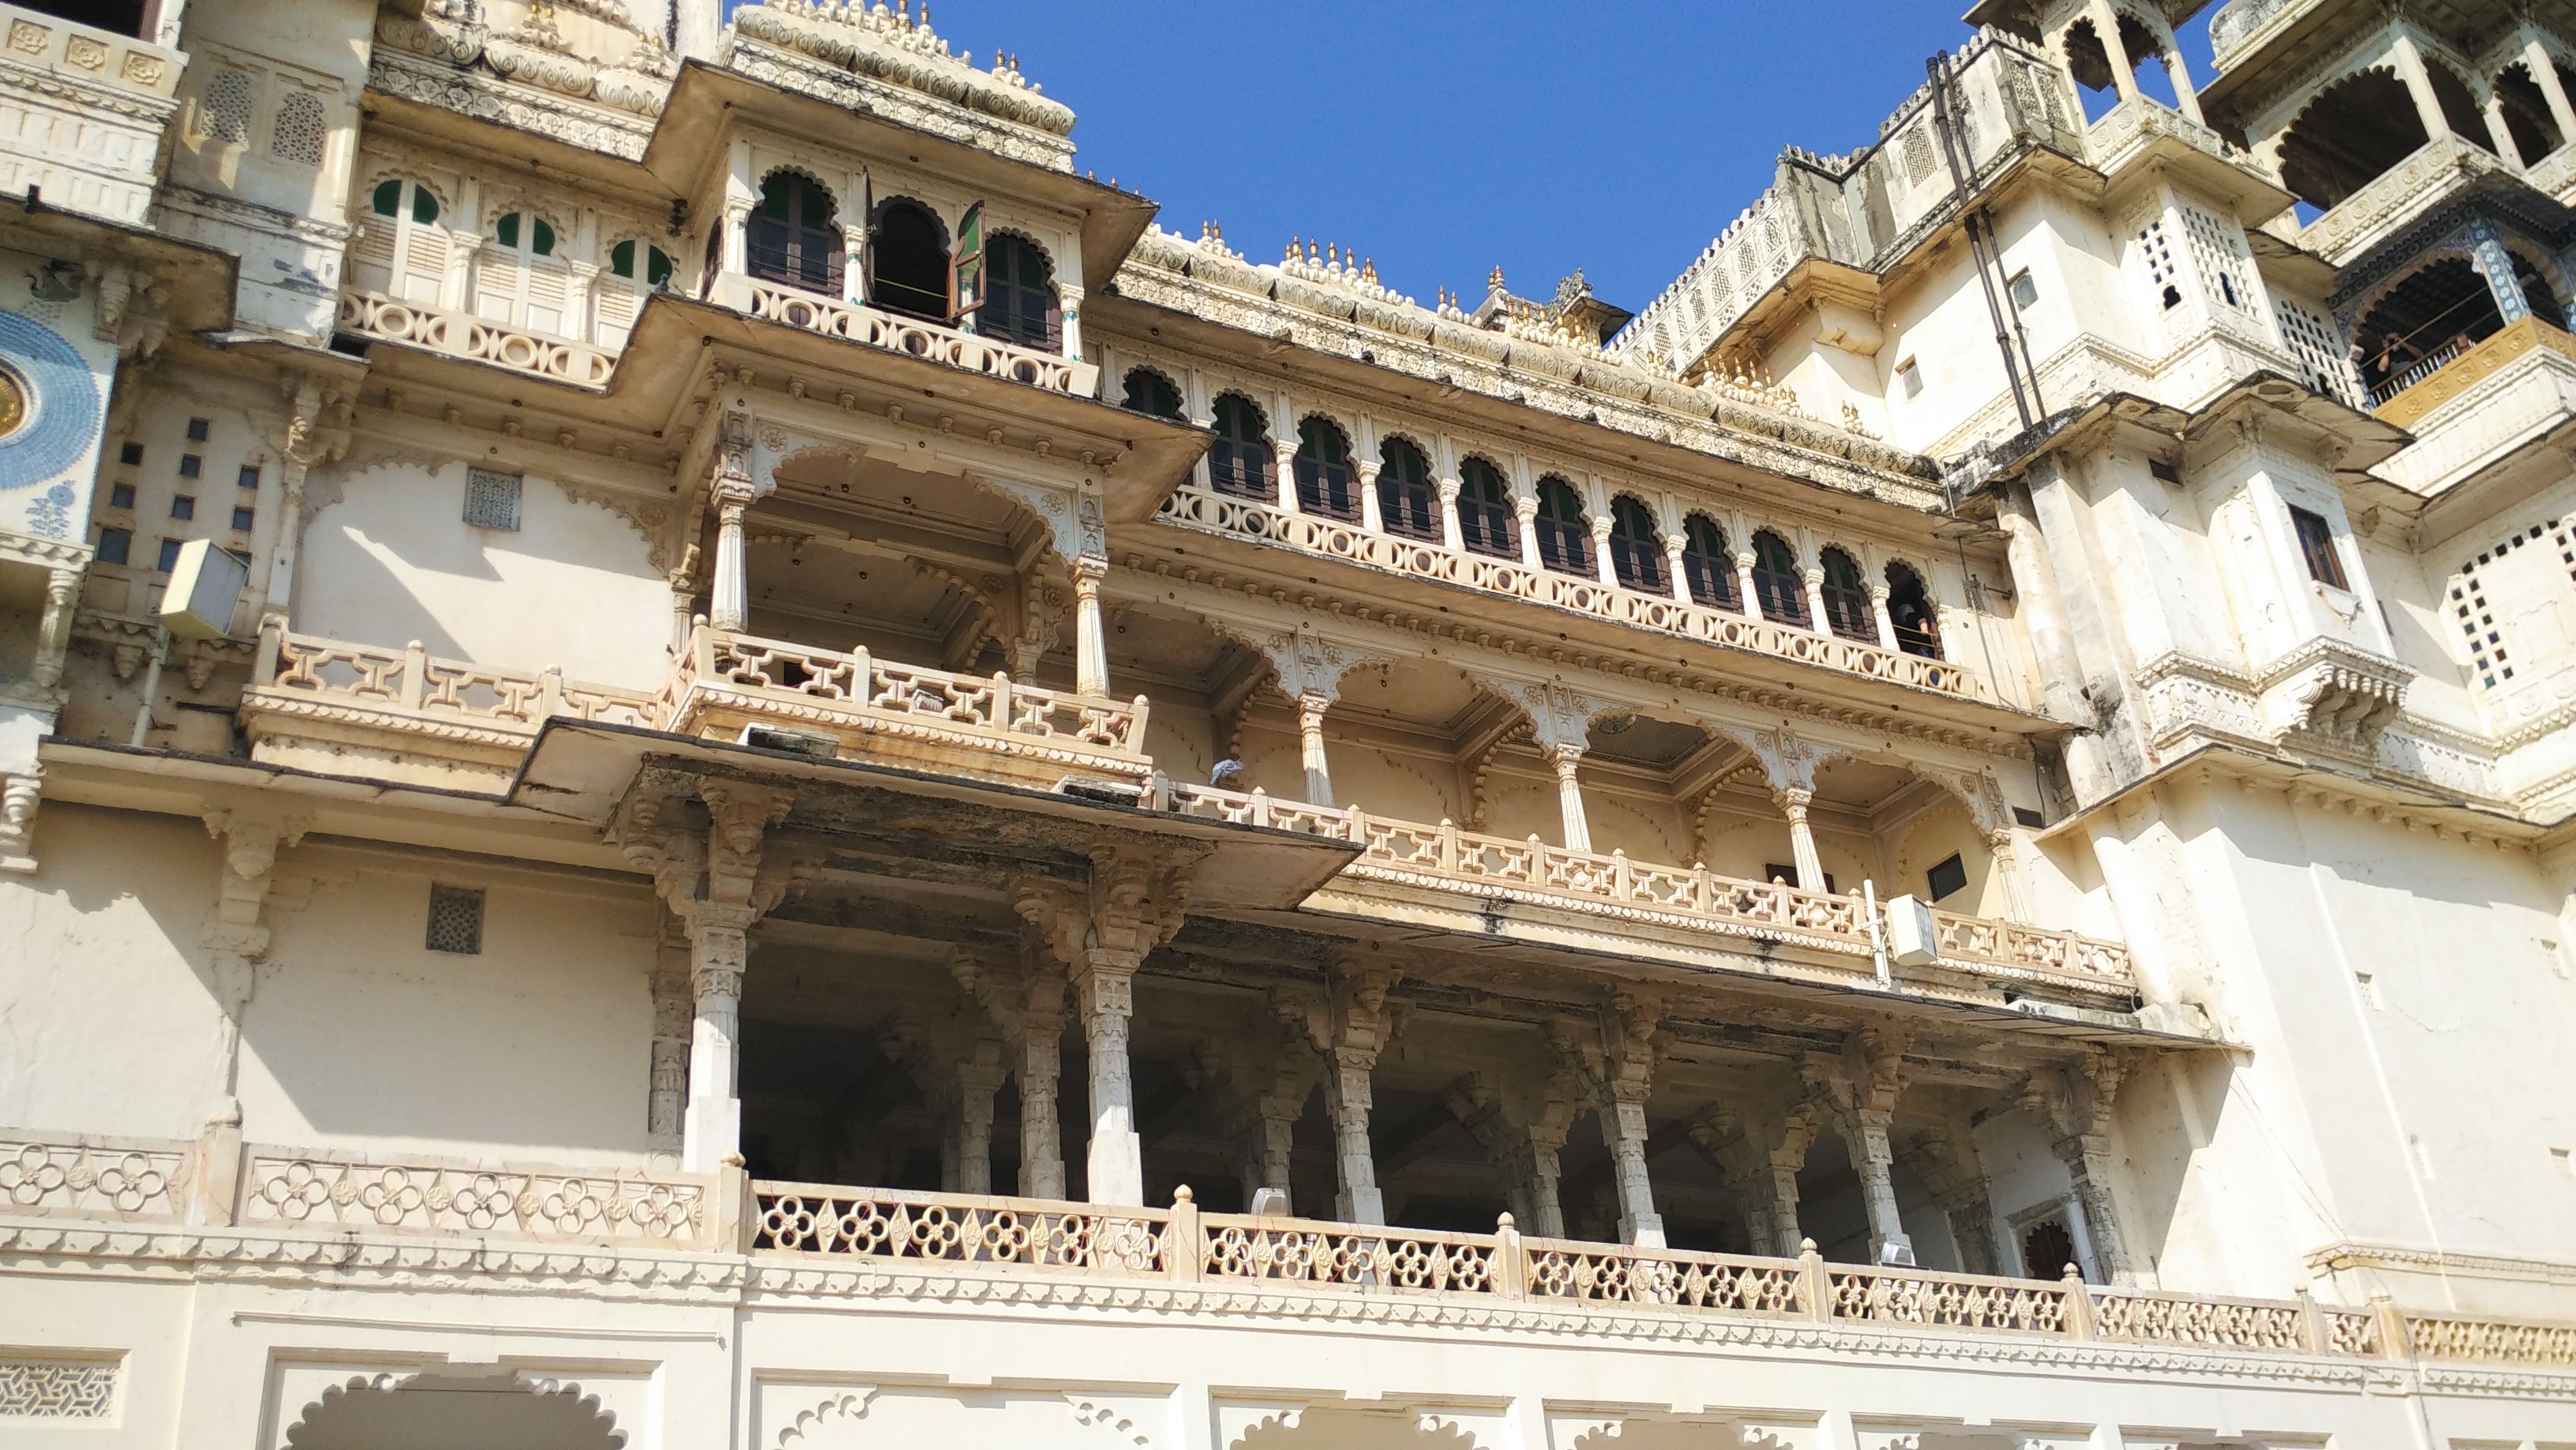 EXPLORING UDAIPUR AND MOUNT ABU